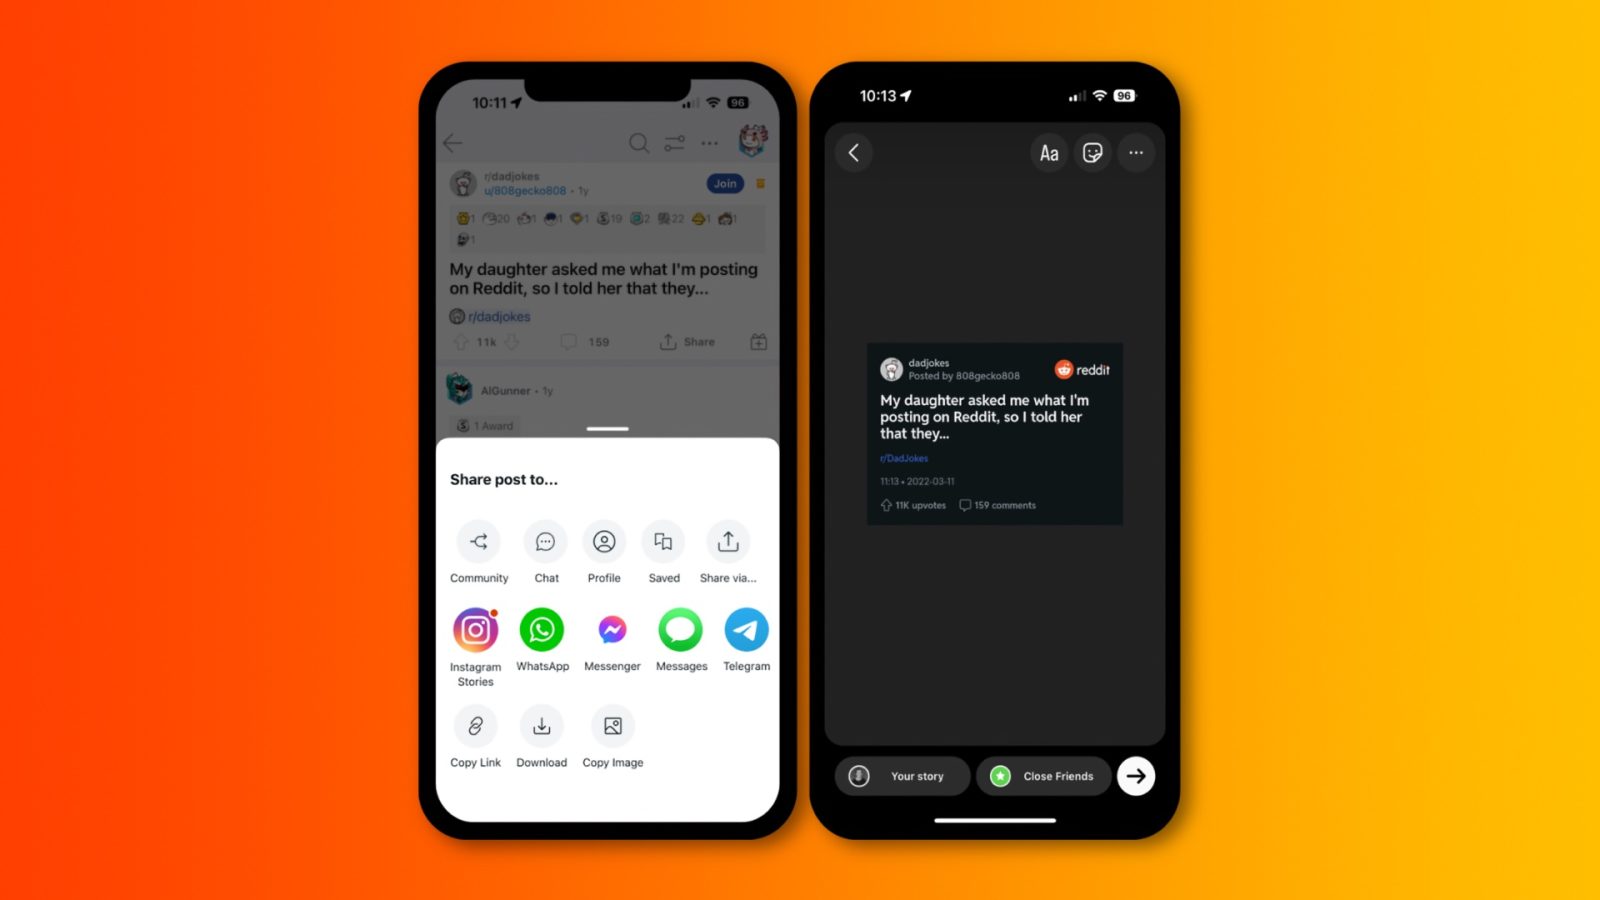 Reddit adds rich previews for links shared in iMessage and Instagram Stories integration